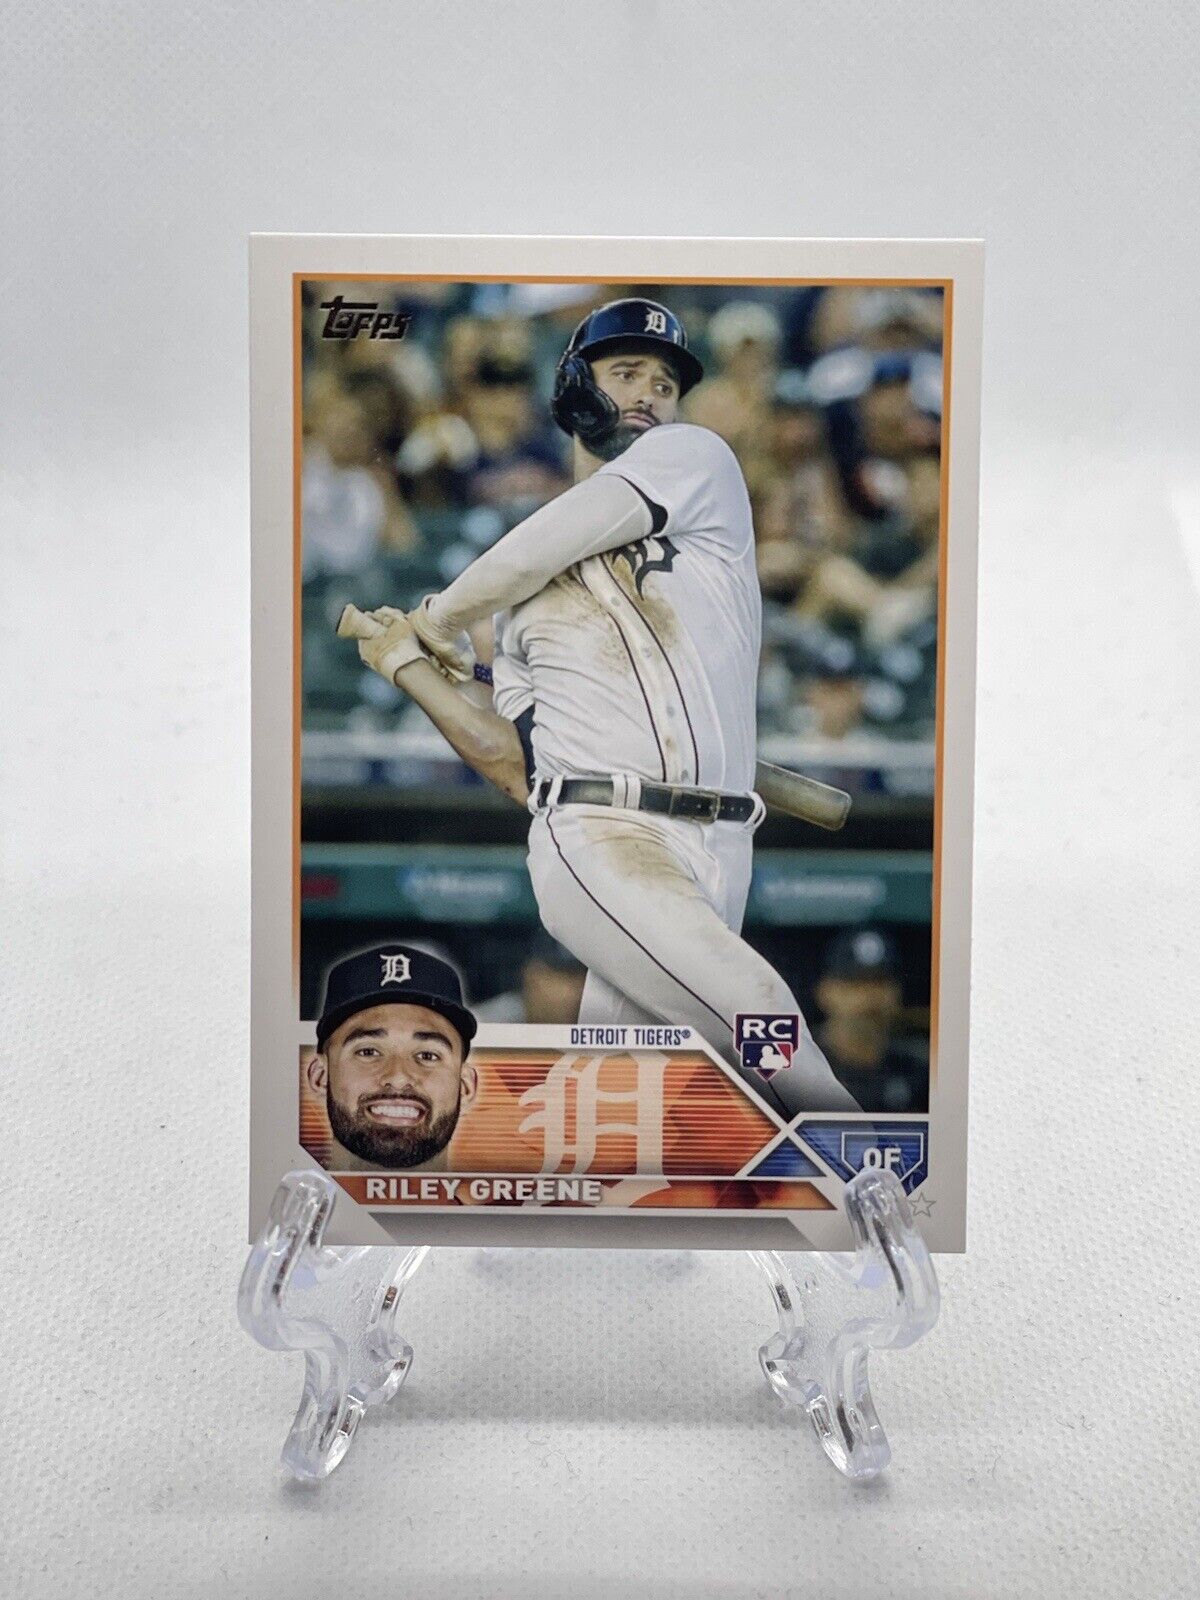 2023 Topps Series 1 RILEY GREENE Rookie Card Detroit Tigers 31 RC